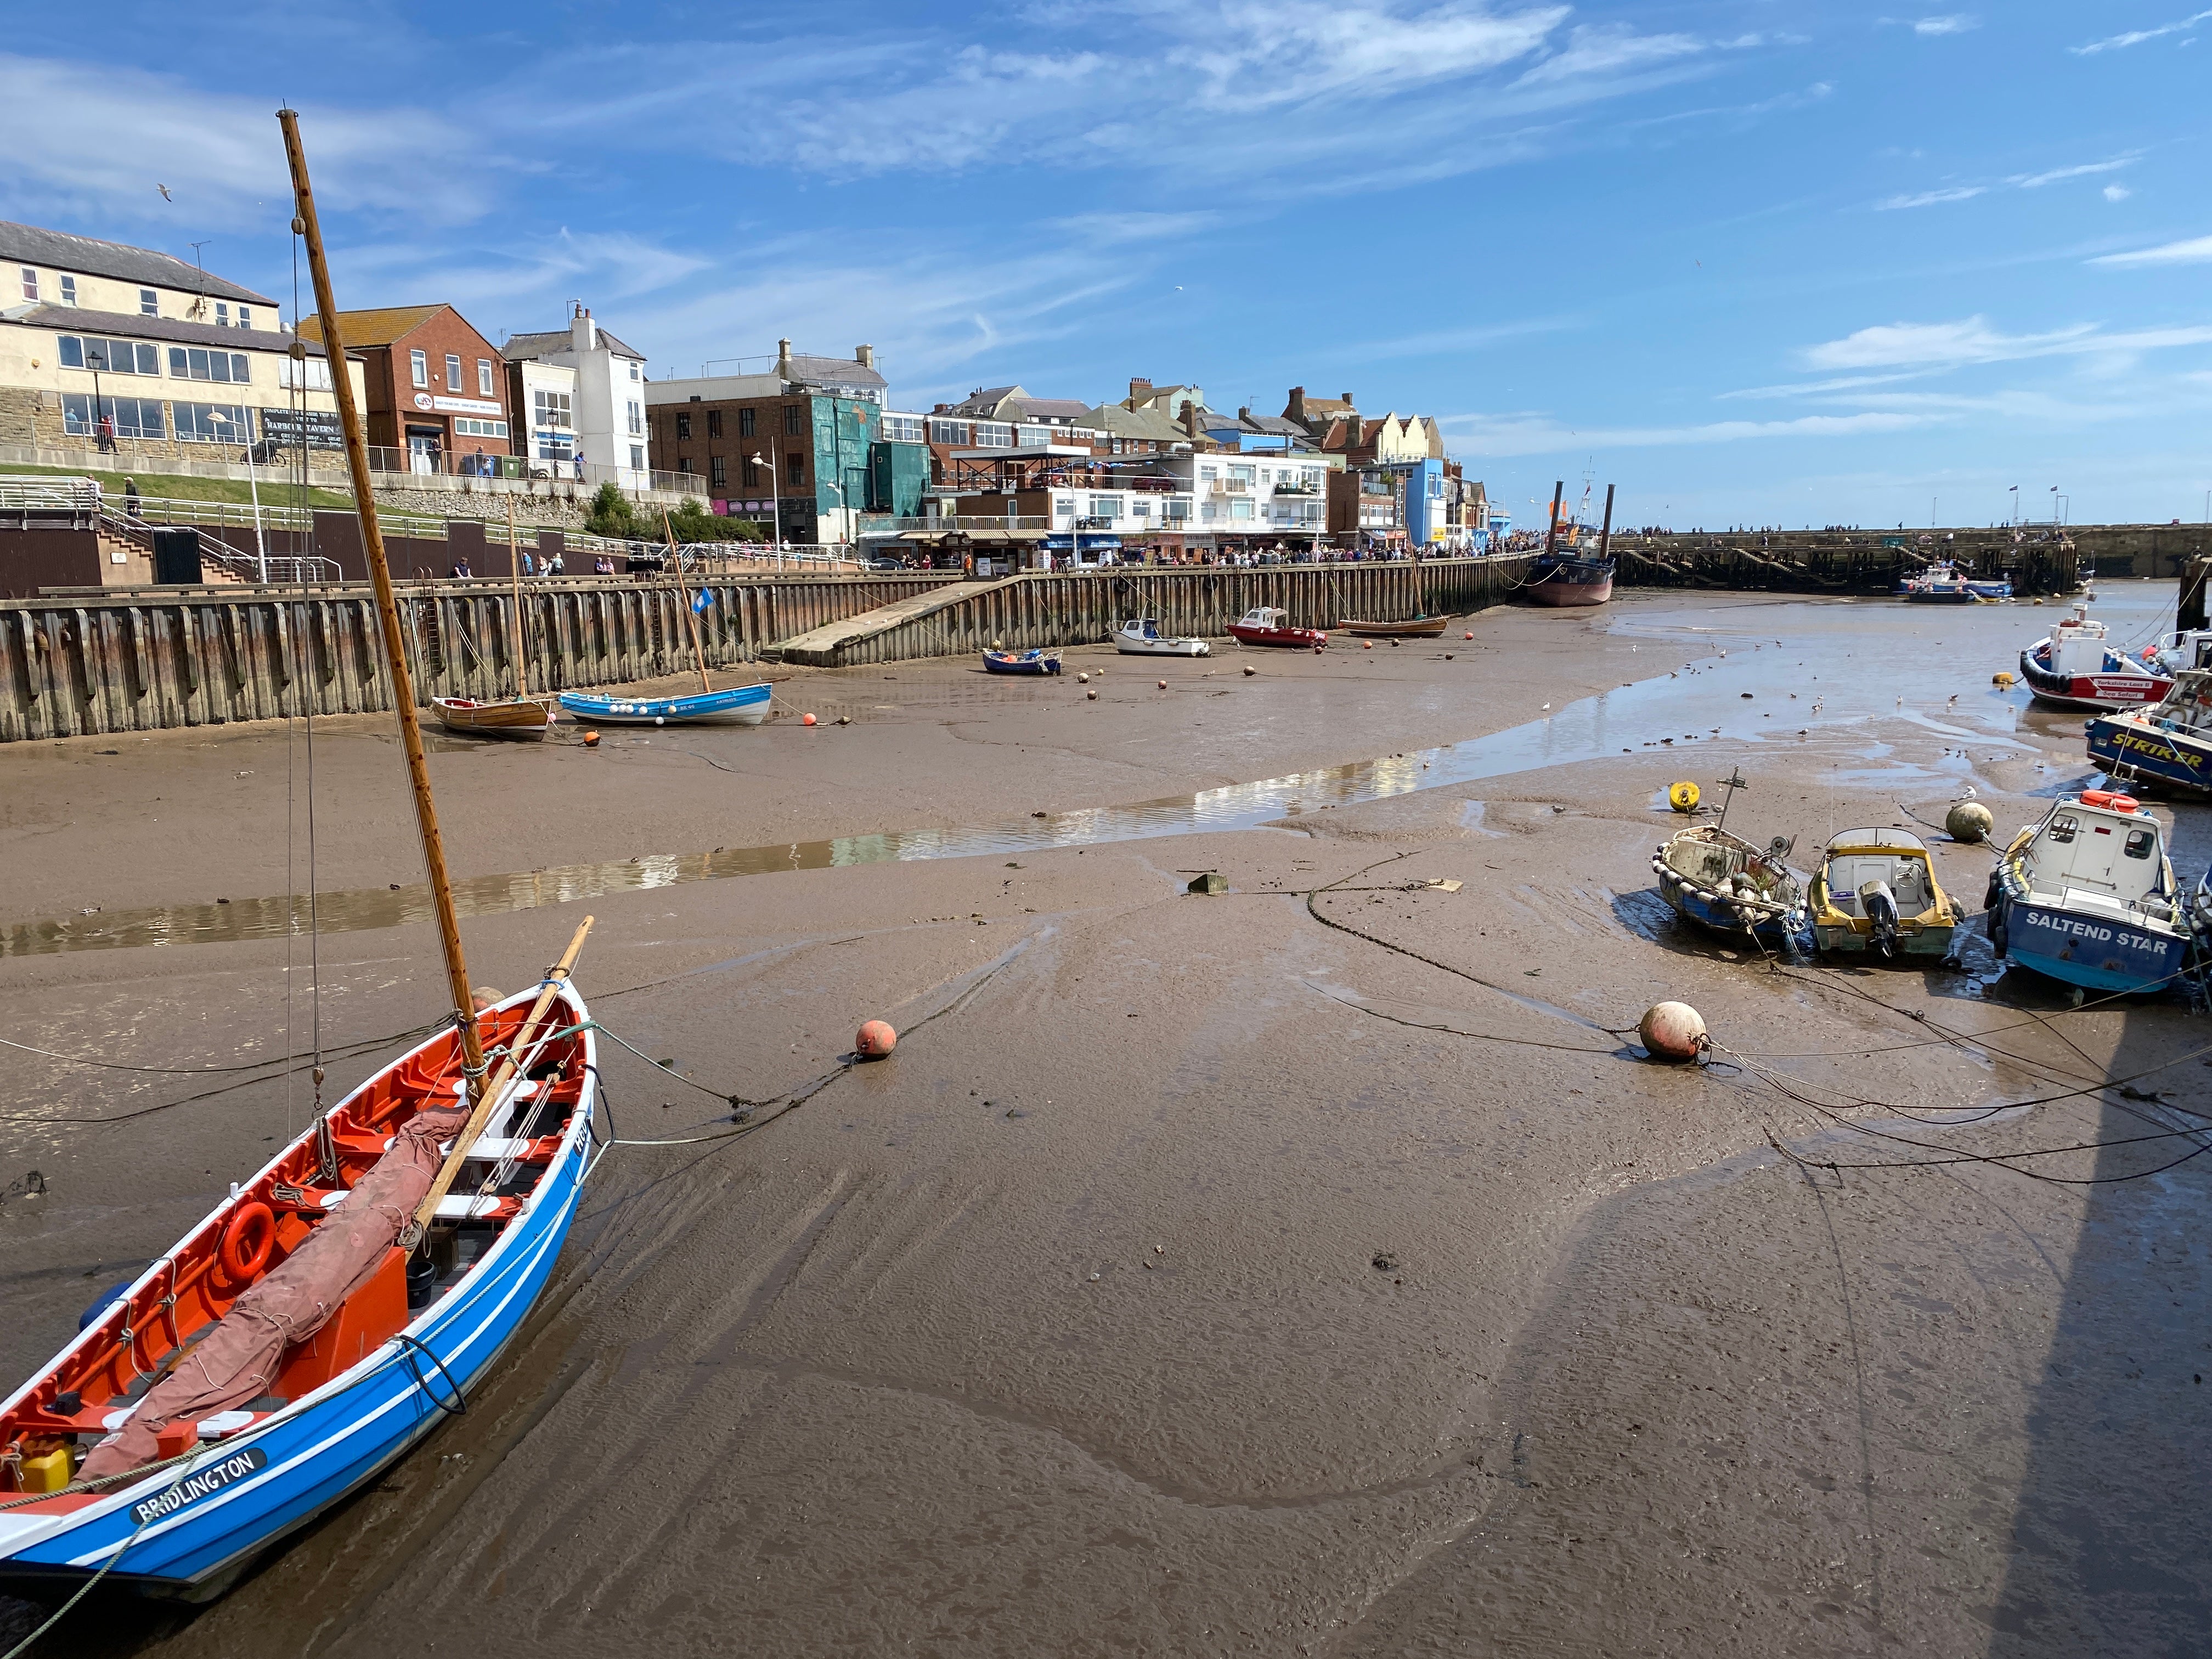 Endless summer: Bridlington in the East Riding of Yorkshire